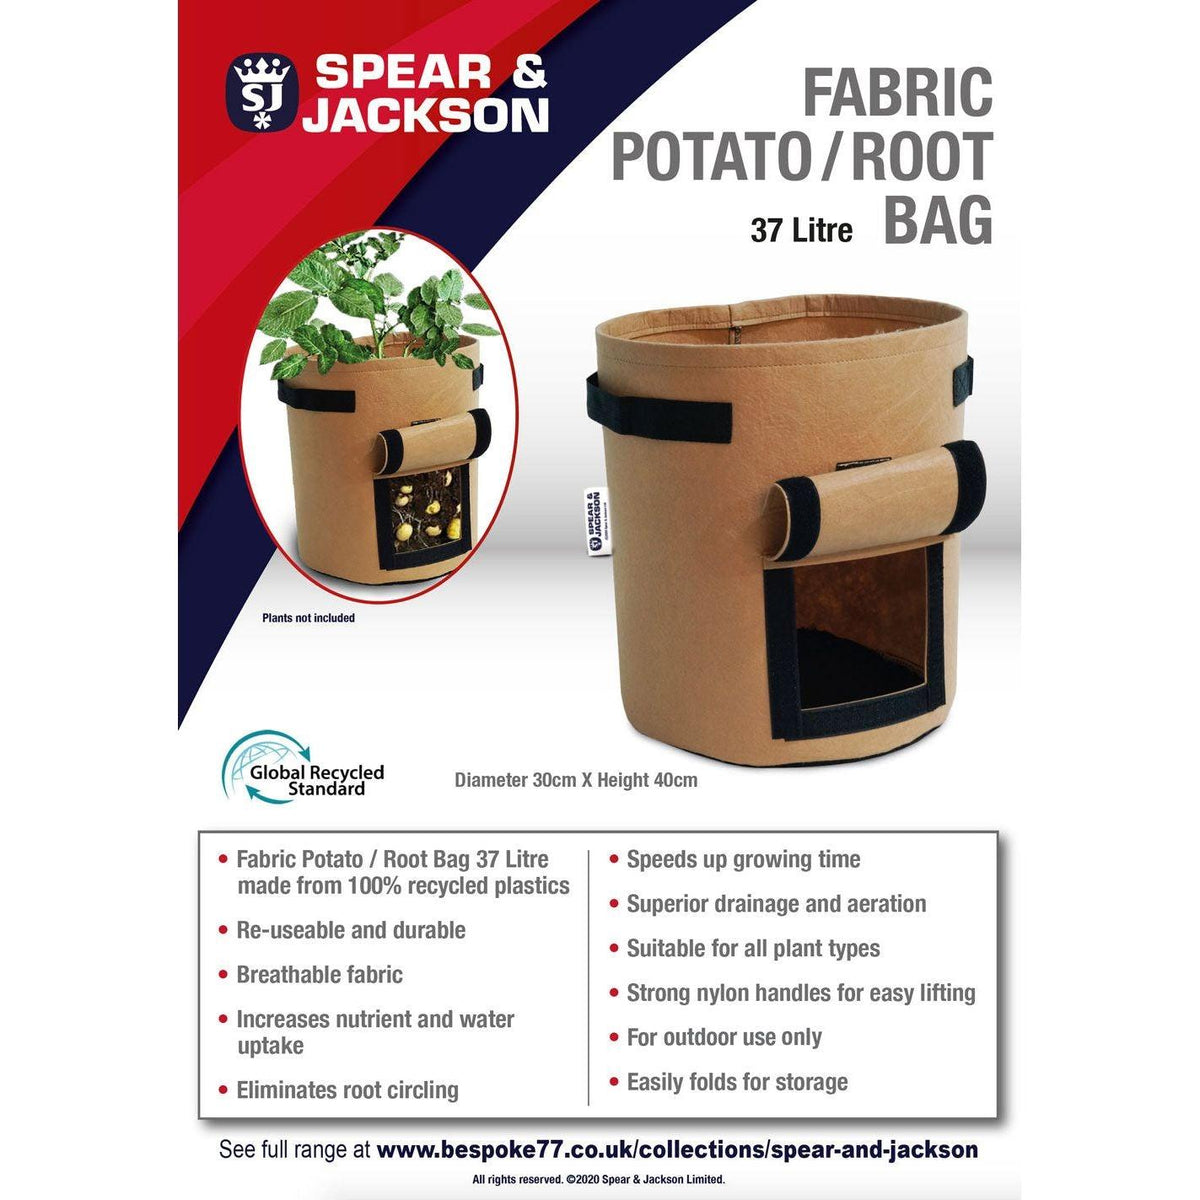 Spear and Jackson - 37 Litre Potato / Root Bag, Re-useable, Breathable fabric. speeds up growing time